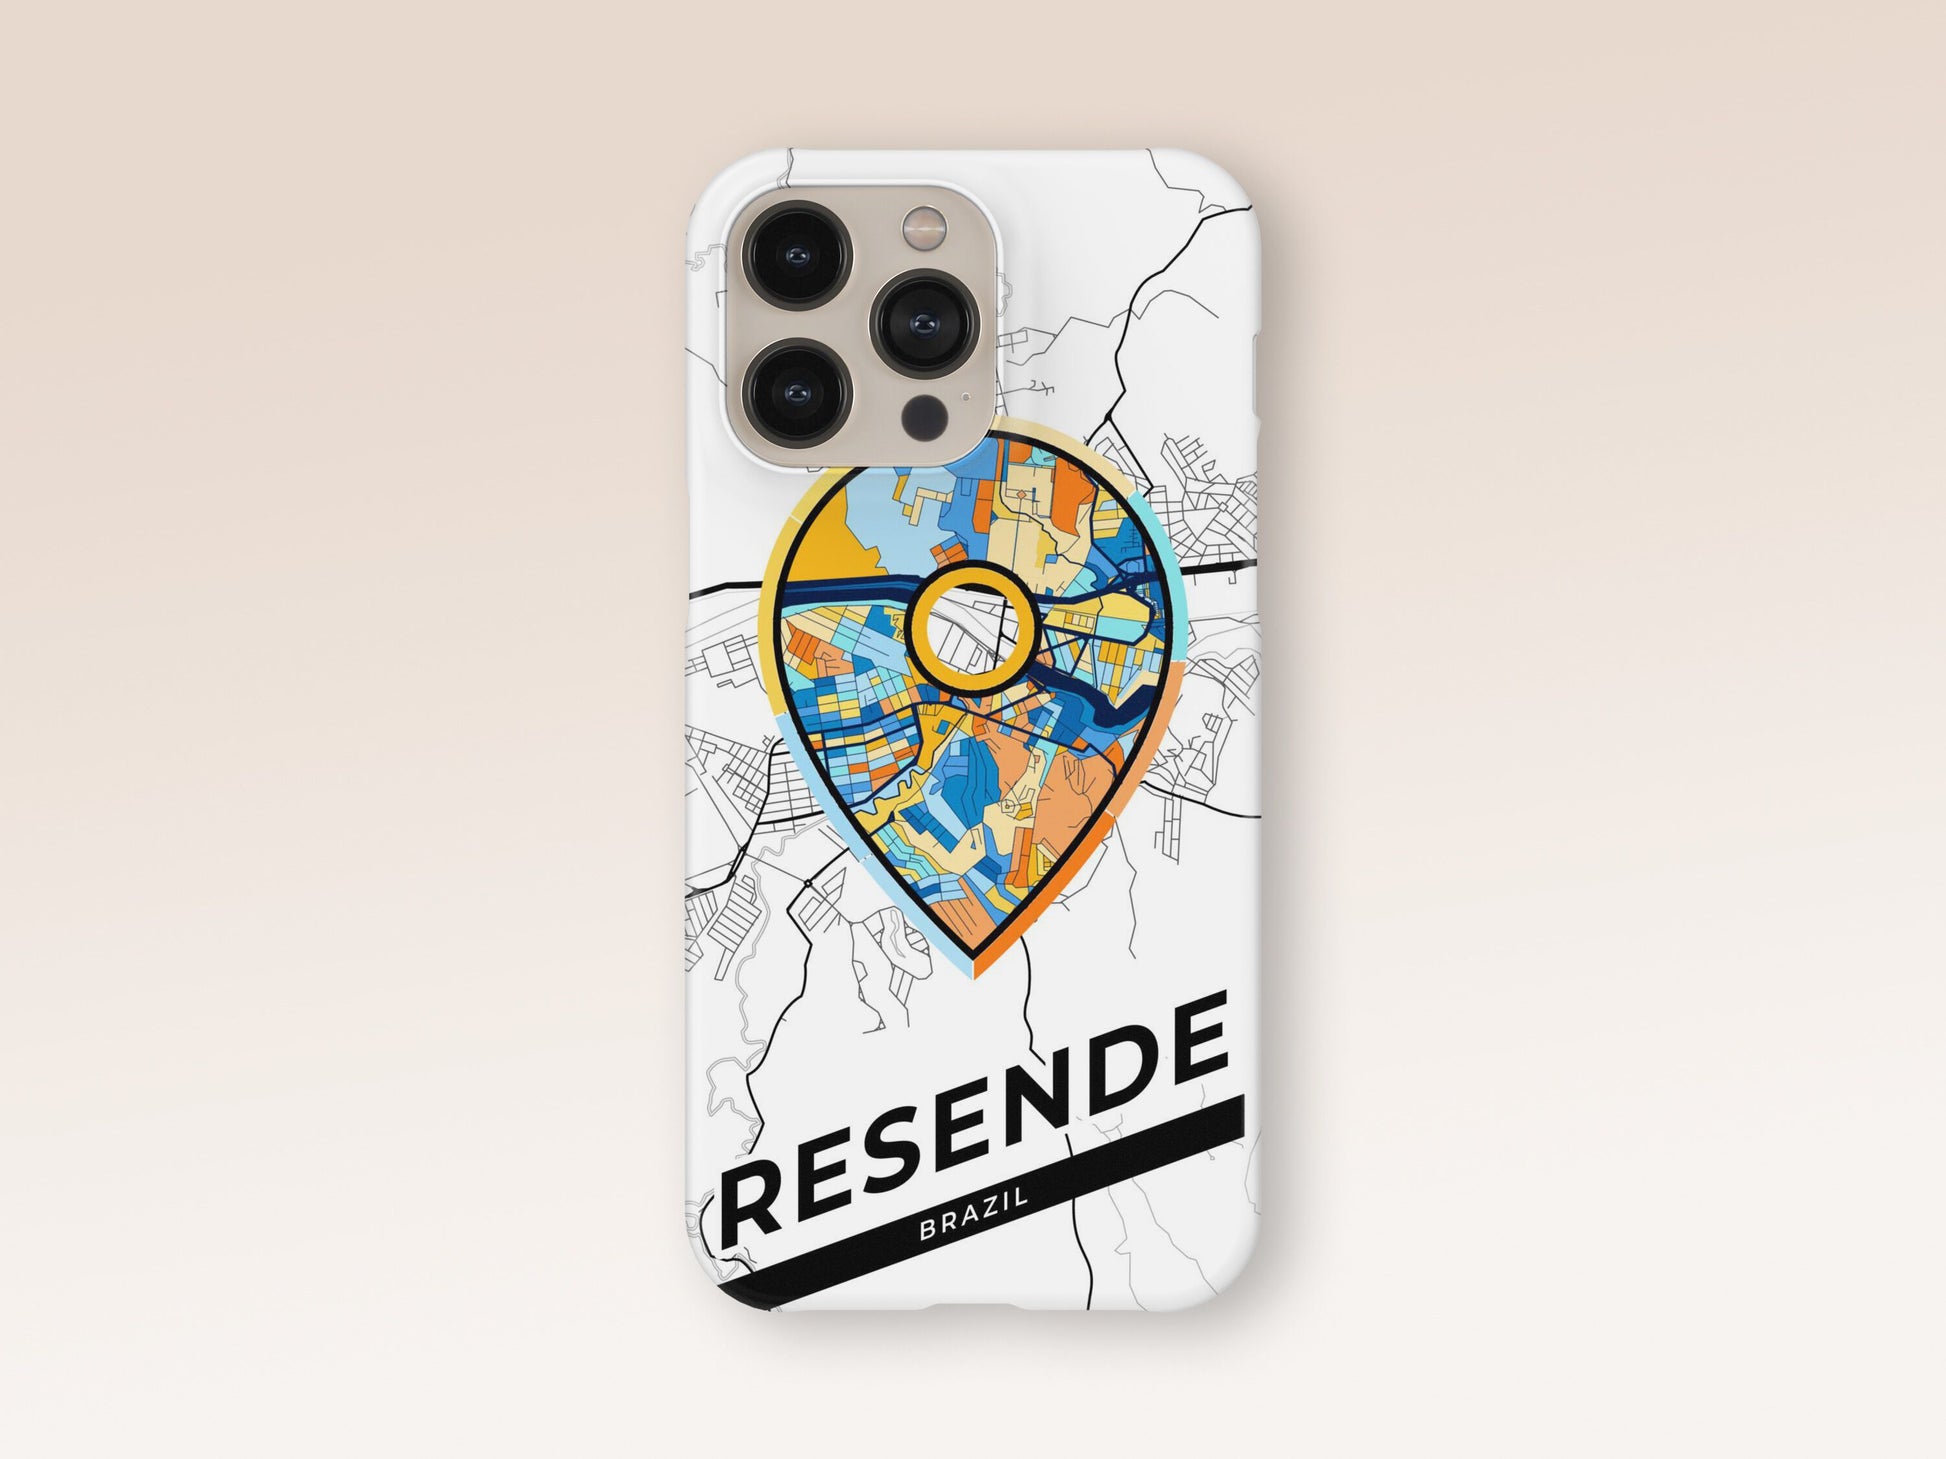 Resende Brazil slim phone case with colorful icon. Birthday, wedding or housewarming gift. Couple match cases. 1